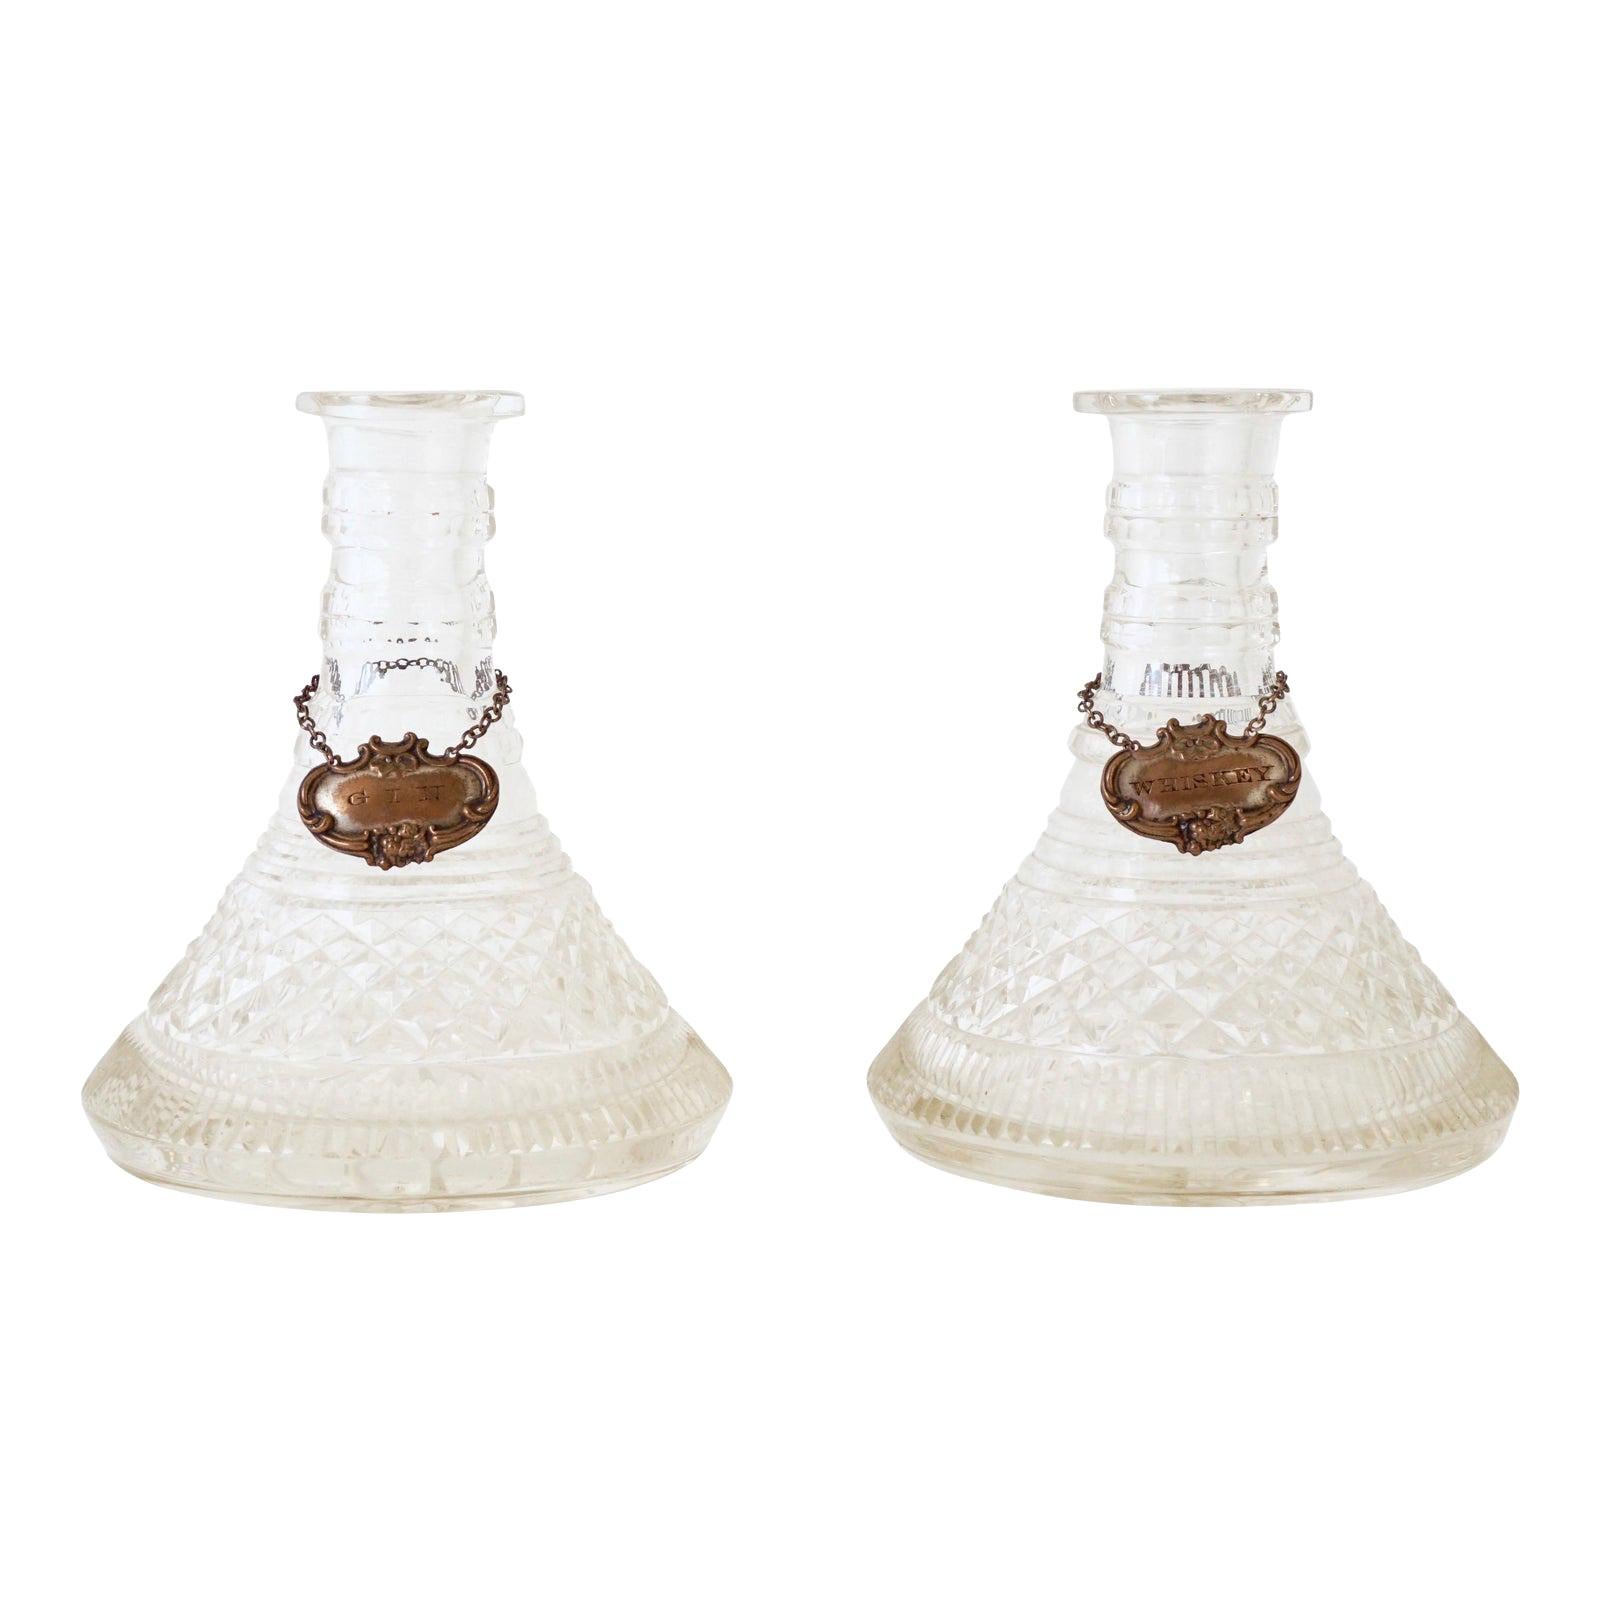 19th Century Crystal Glass Ships Decanters, Pair for Whiskey and Gin